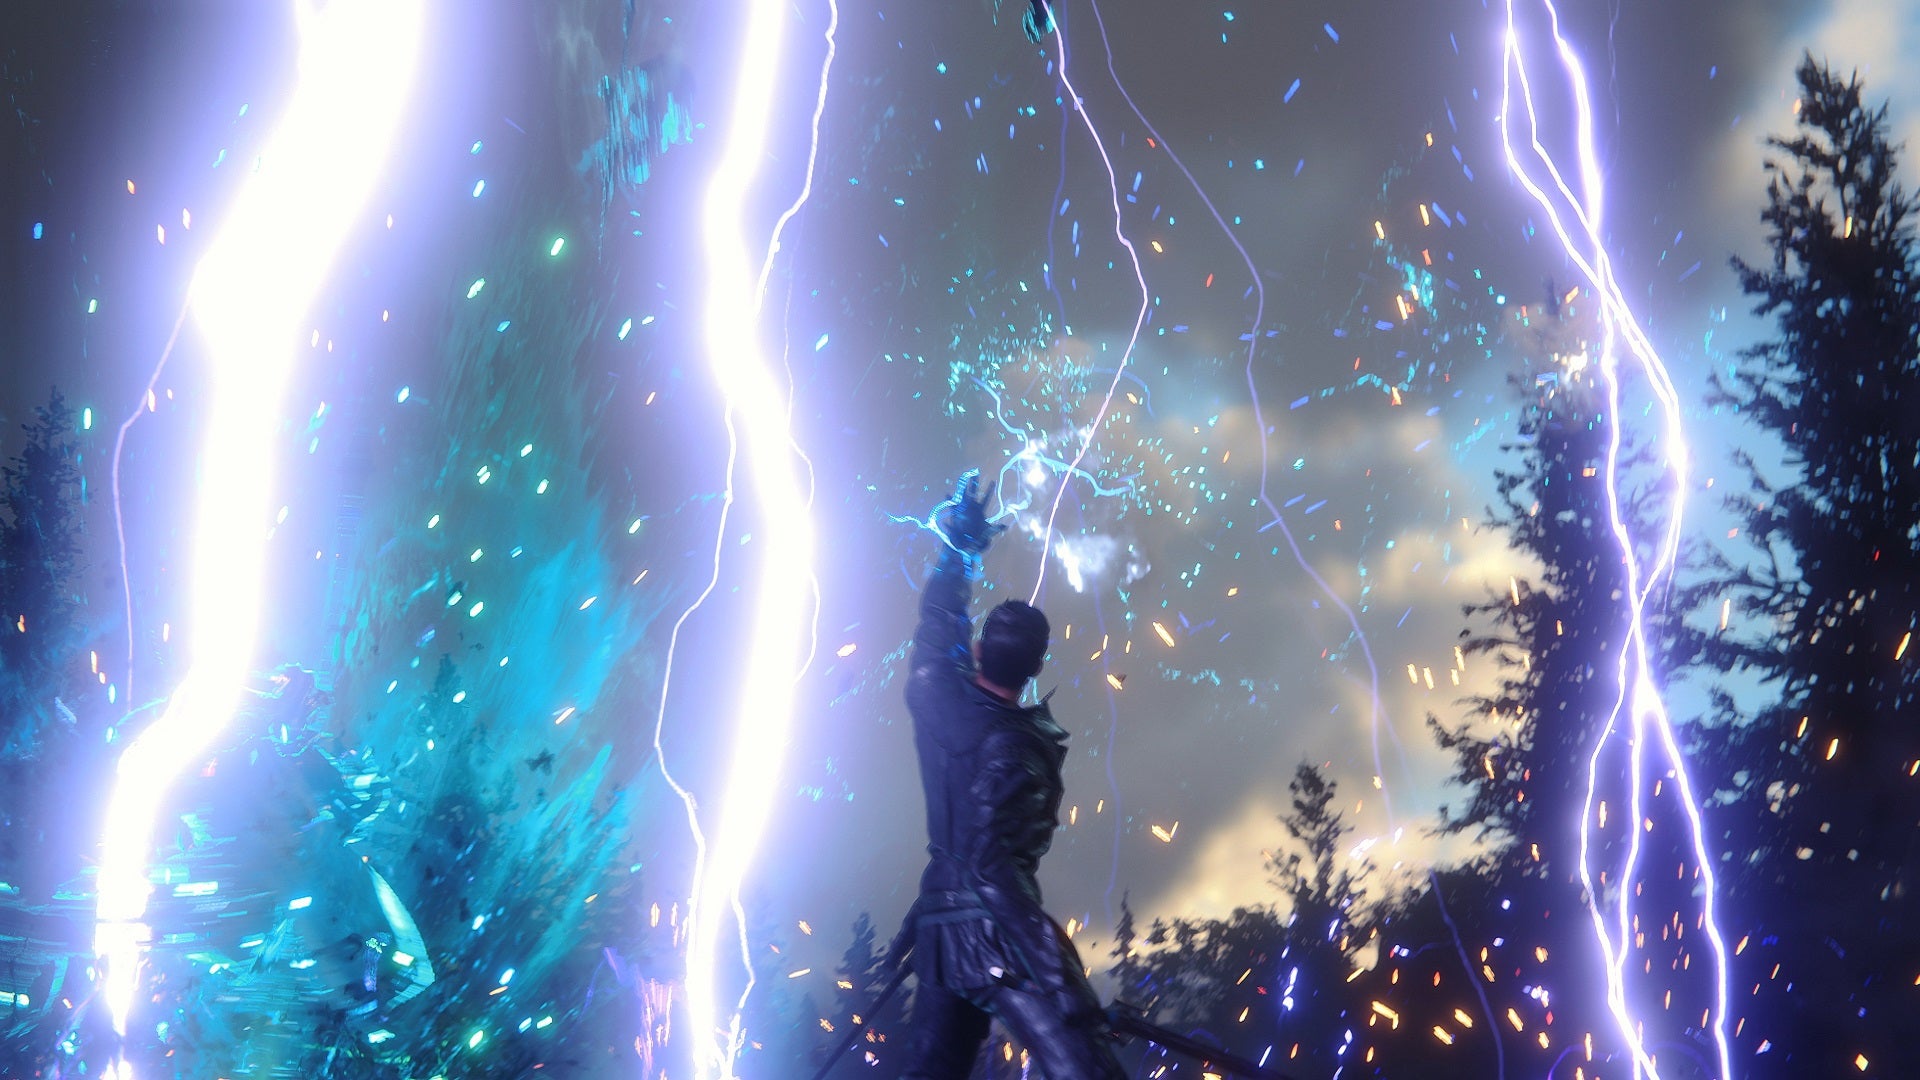 A Final Fantasy 16 character summons lightning powers from their Eikon.